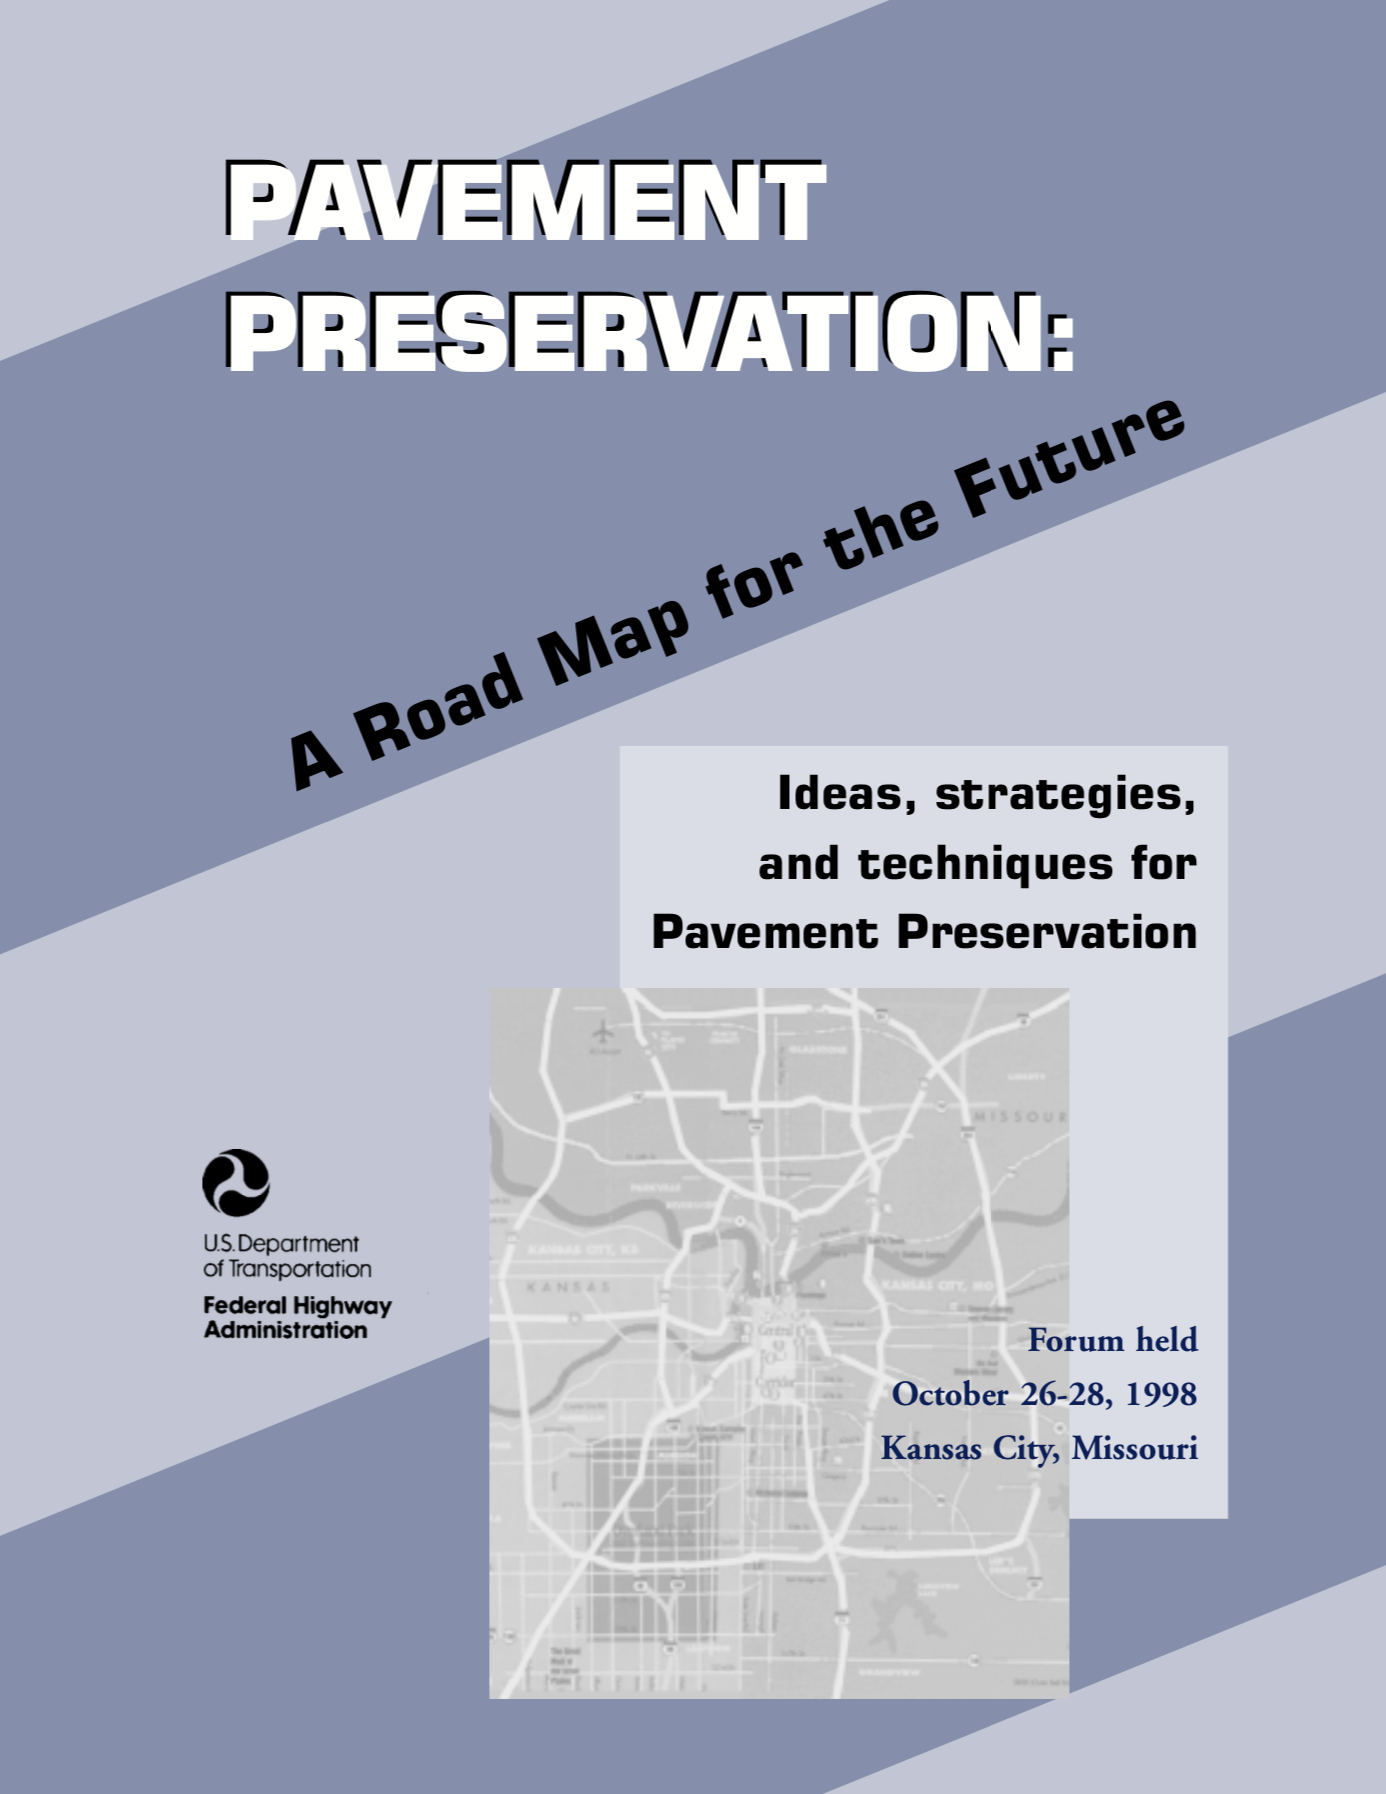 Pavement Preservation: A Road Map for the Future [PUB]